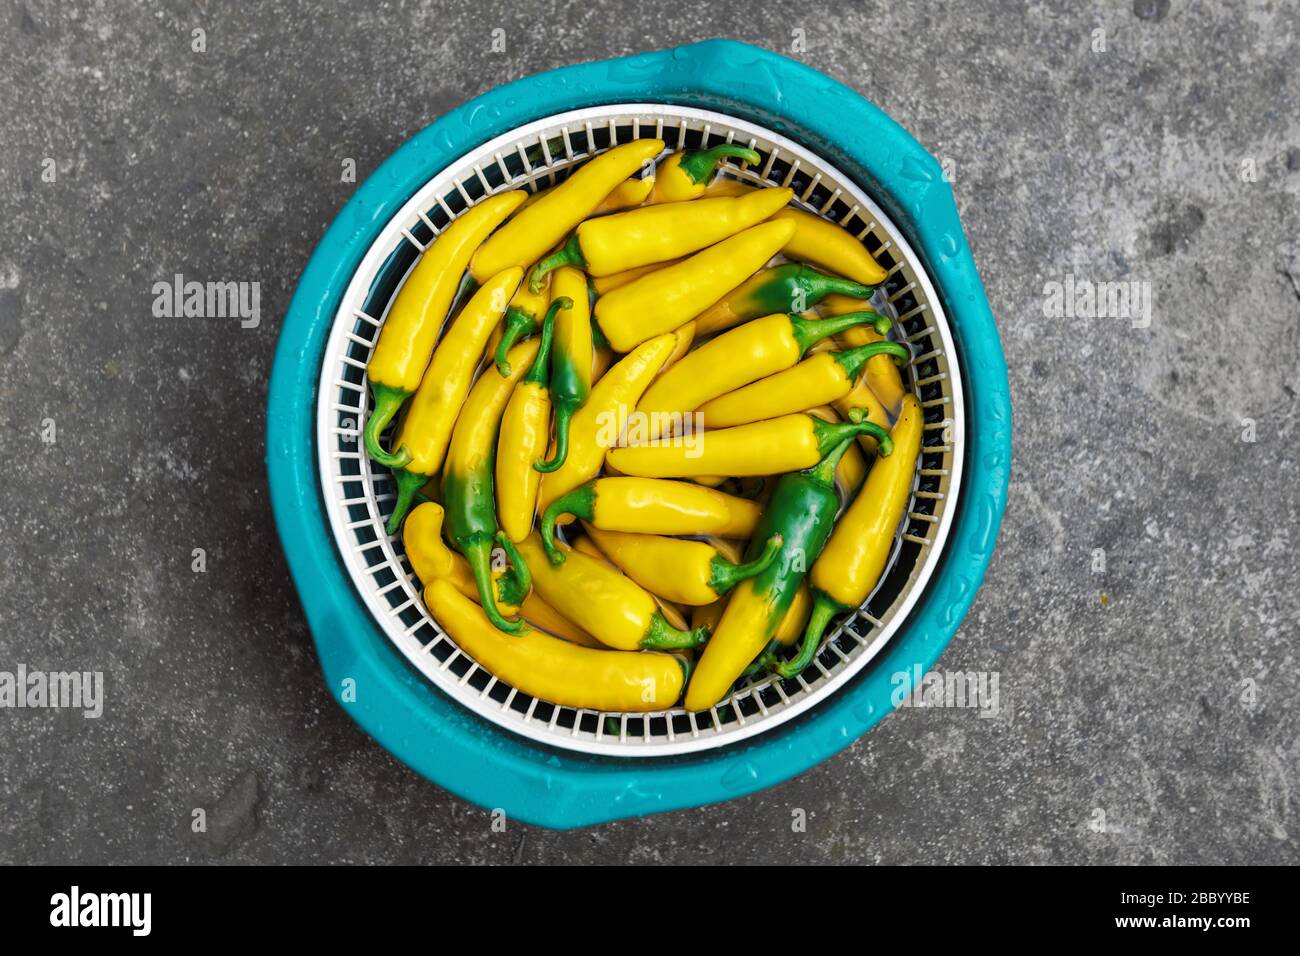 Yellow hot peppers on green bowl closeup. Food photography Stock Photo